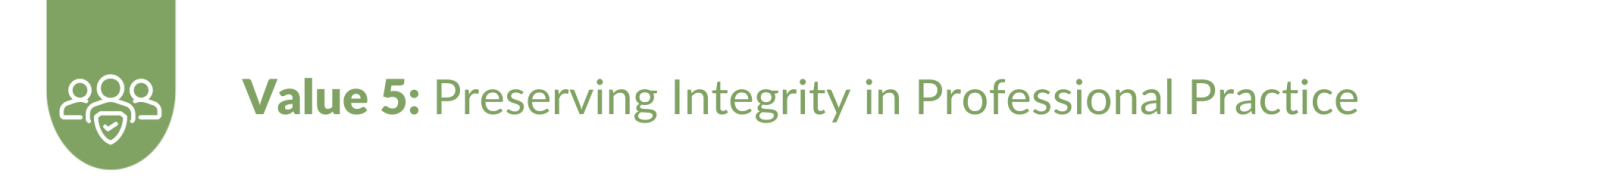 Value 5: Preserving Integrity in Professional Practice